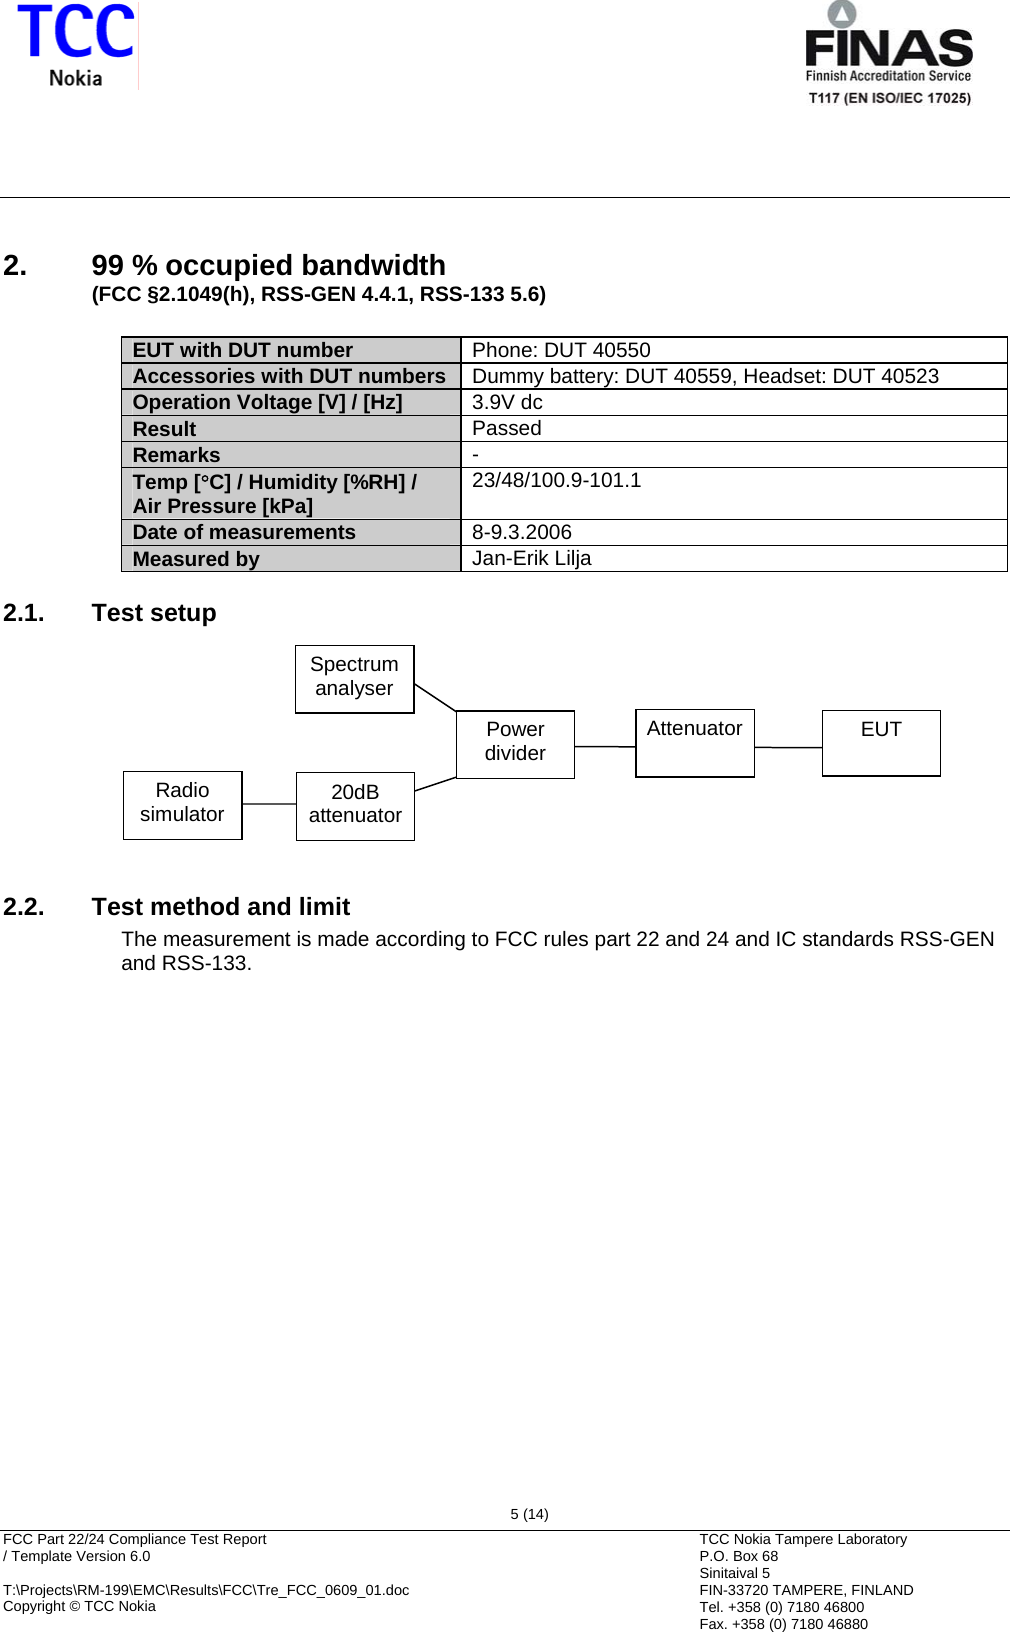       FCC Part 22/24 Compliance Test Report  / Template Version 6.0        T:\Projects\RM-199\EMC\Results\FCC\Tre_FCC_0609_01.doc Copyright © TCC Nokia  5 (14) TCC Nokia Tampere Laboratory P.O. Box 68 Sinitaival 5 FIN-33720 TAMPERE, FINLAND Tel. +358 (0) 7180 46800 Fax. +358 (0) 7180 46880 2.  99 % occupied bandwidth (FCC §2.1049(h), RSS-GEN 4.4.1, RSS-133 5.6)  EUT with DUT number  Phone: DUT 40550 Accessories with DUT numbers  Dummy battery: DUT 40559, Headset: DUT 40523 Operation Voltage [V] / [Hz]  3.9V dc Result  Passed Remarks  - Temp [°C] / Humidity [%RH] /  Air Pressure [kPa]  23/48/100.9-101.1 Date of measurements  8-9.3.2006 Measured by  Jan-Erik Lilja 2.1. Test setup Spectrumanalyser Power dividerAttenuator EUT Radio simulator  20dB attenuator   2.2.  Test method and limit The measurement is made according to FCC rules part 22 and 24 and IC standards RSS-GEN and RSS-133.  